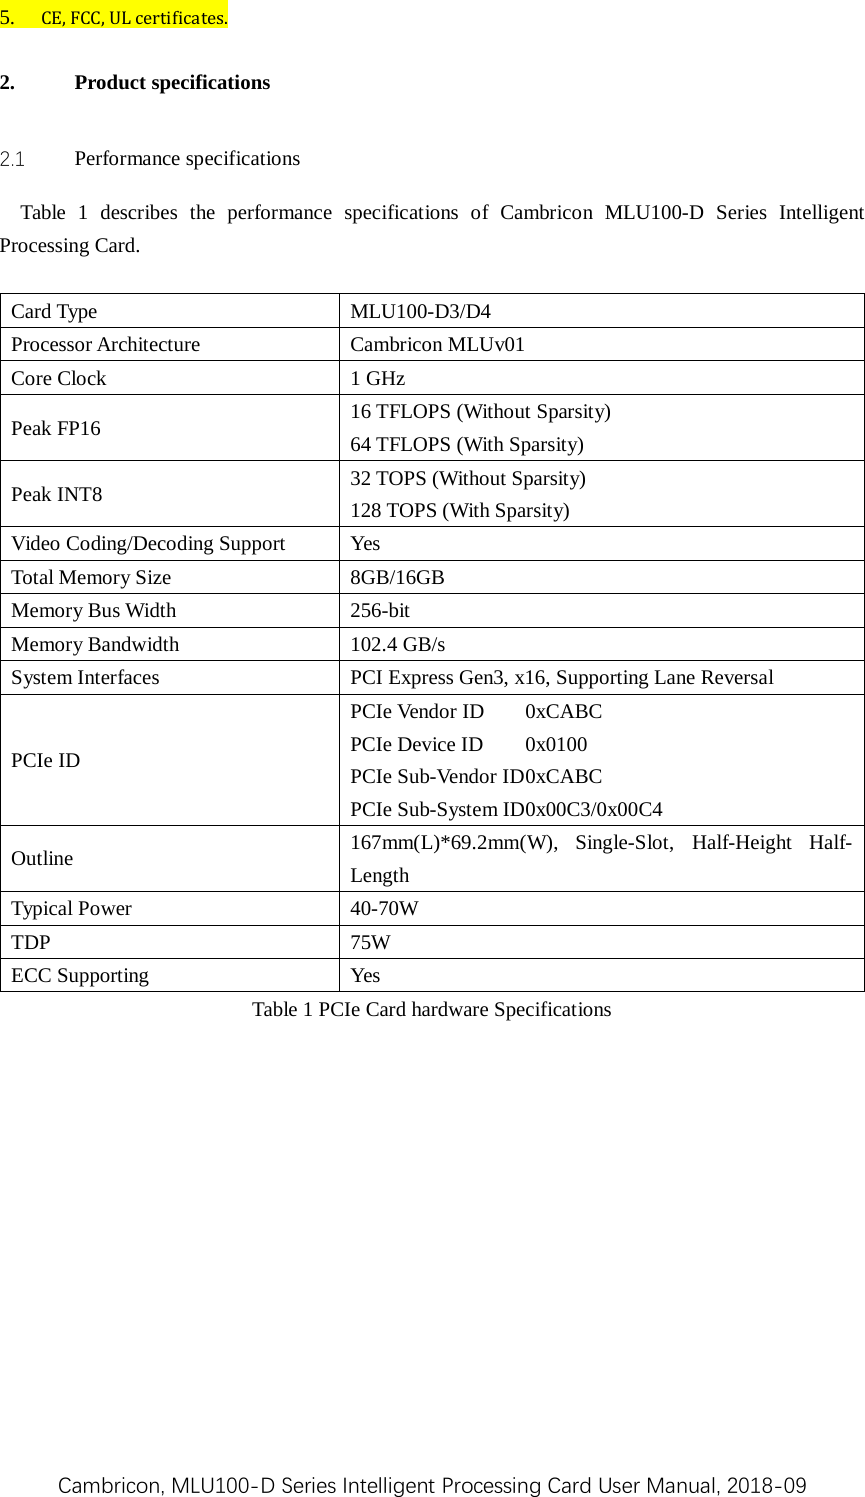 Cambricon, MLU100-D Series Intelligent Processing Card User Manual, 2018-09 5. CE, FCC, UL certificates. 2. Product specifications 2.1 Performance specifications Table  1  describes the performance specifications of Cambricon MLU100-D  Series Intelligent Processing Card.    Card Type  MLU100-D3/D4 Processor Architecture Cambricon MLUv01 Core Clock 1 GHz Peak FP16 16 TFLOPS (Without Sparsity) 64 TFLOPS (With Sparsity) Peak INT8 32 TOPS (Without Sparsity) 128 TOPS (With Sparsity) Video Coding/Decoding Support  Yes Total Memory Size  8GB/16GB Memory Bus Width  256-bit Memory Bandwidth 102.4 GB/s System Interfaces PCI Express Gen3, x16, Supporting Lane Reversal PCIe ID PCIe Vendor ID 0xCABC PCIe Device ID  0x0100 PCIe Sub-Vendor ID 0xCABC PCIe Sub-System ID 0x00C3/0x00C4 Outline 167mm(L)*69.2mm(W), Single-Slot, Half-Height Half-Length Typical Power  40-70W TDP  75W ECC Supporting  Yes Table 1 PCIe Card hardware Specifications    